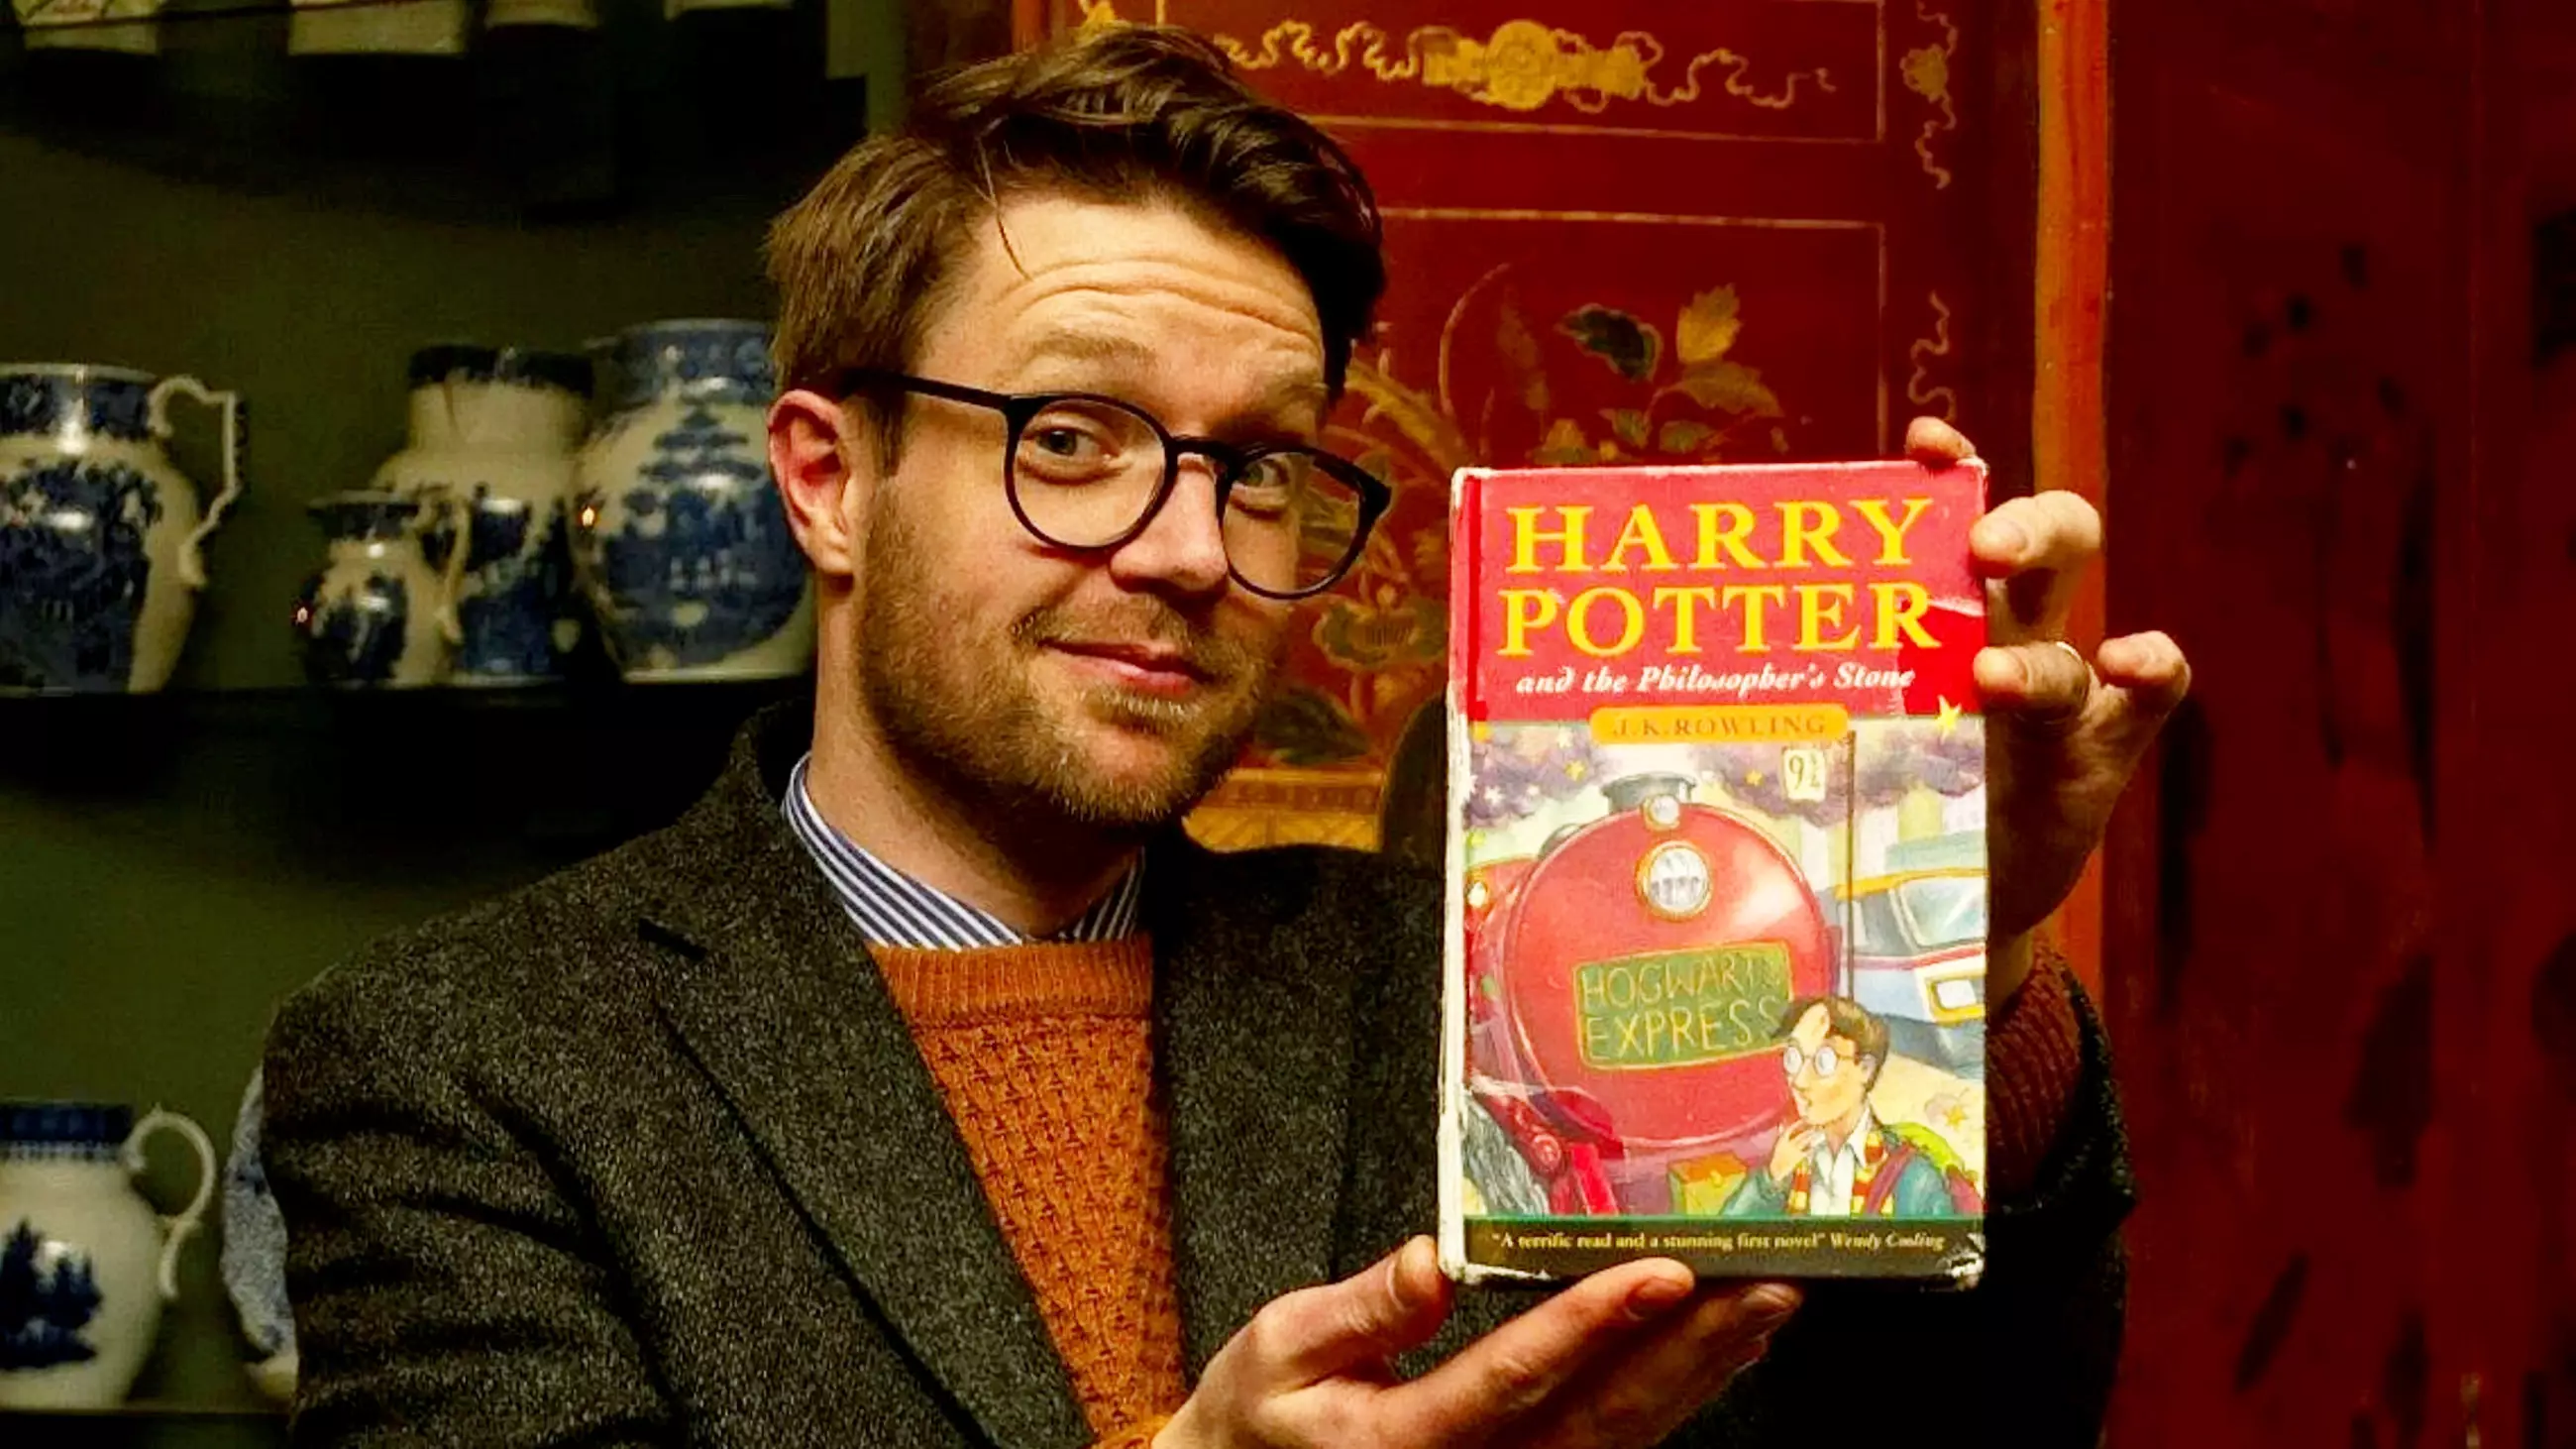 Copy Of Harry Potter Book Found In School Skip Sells For £33,000